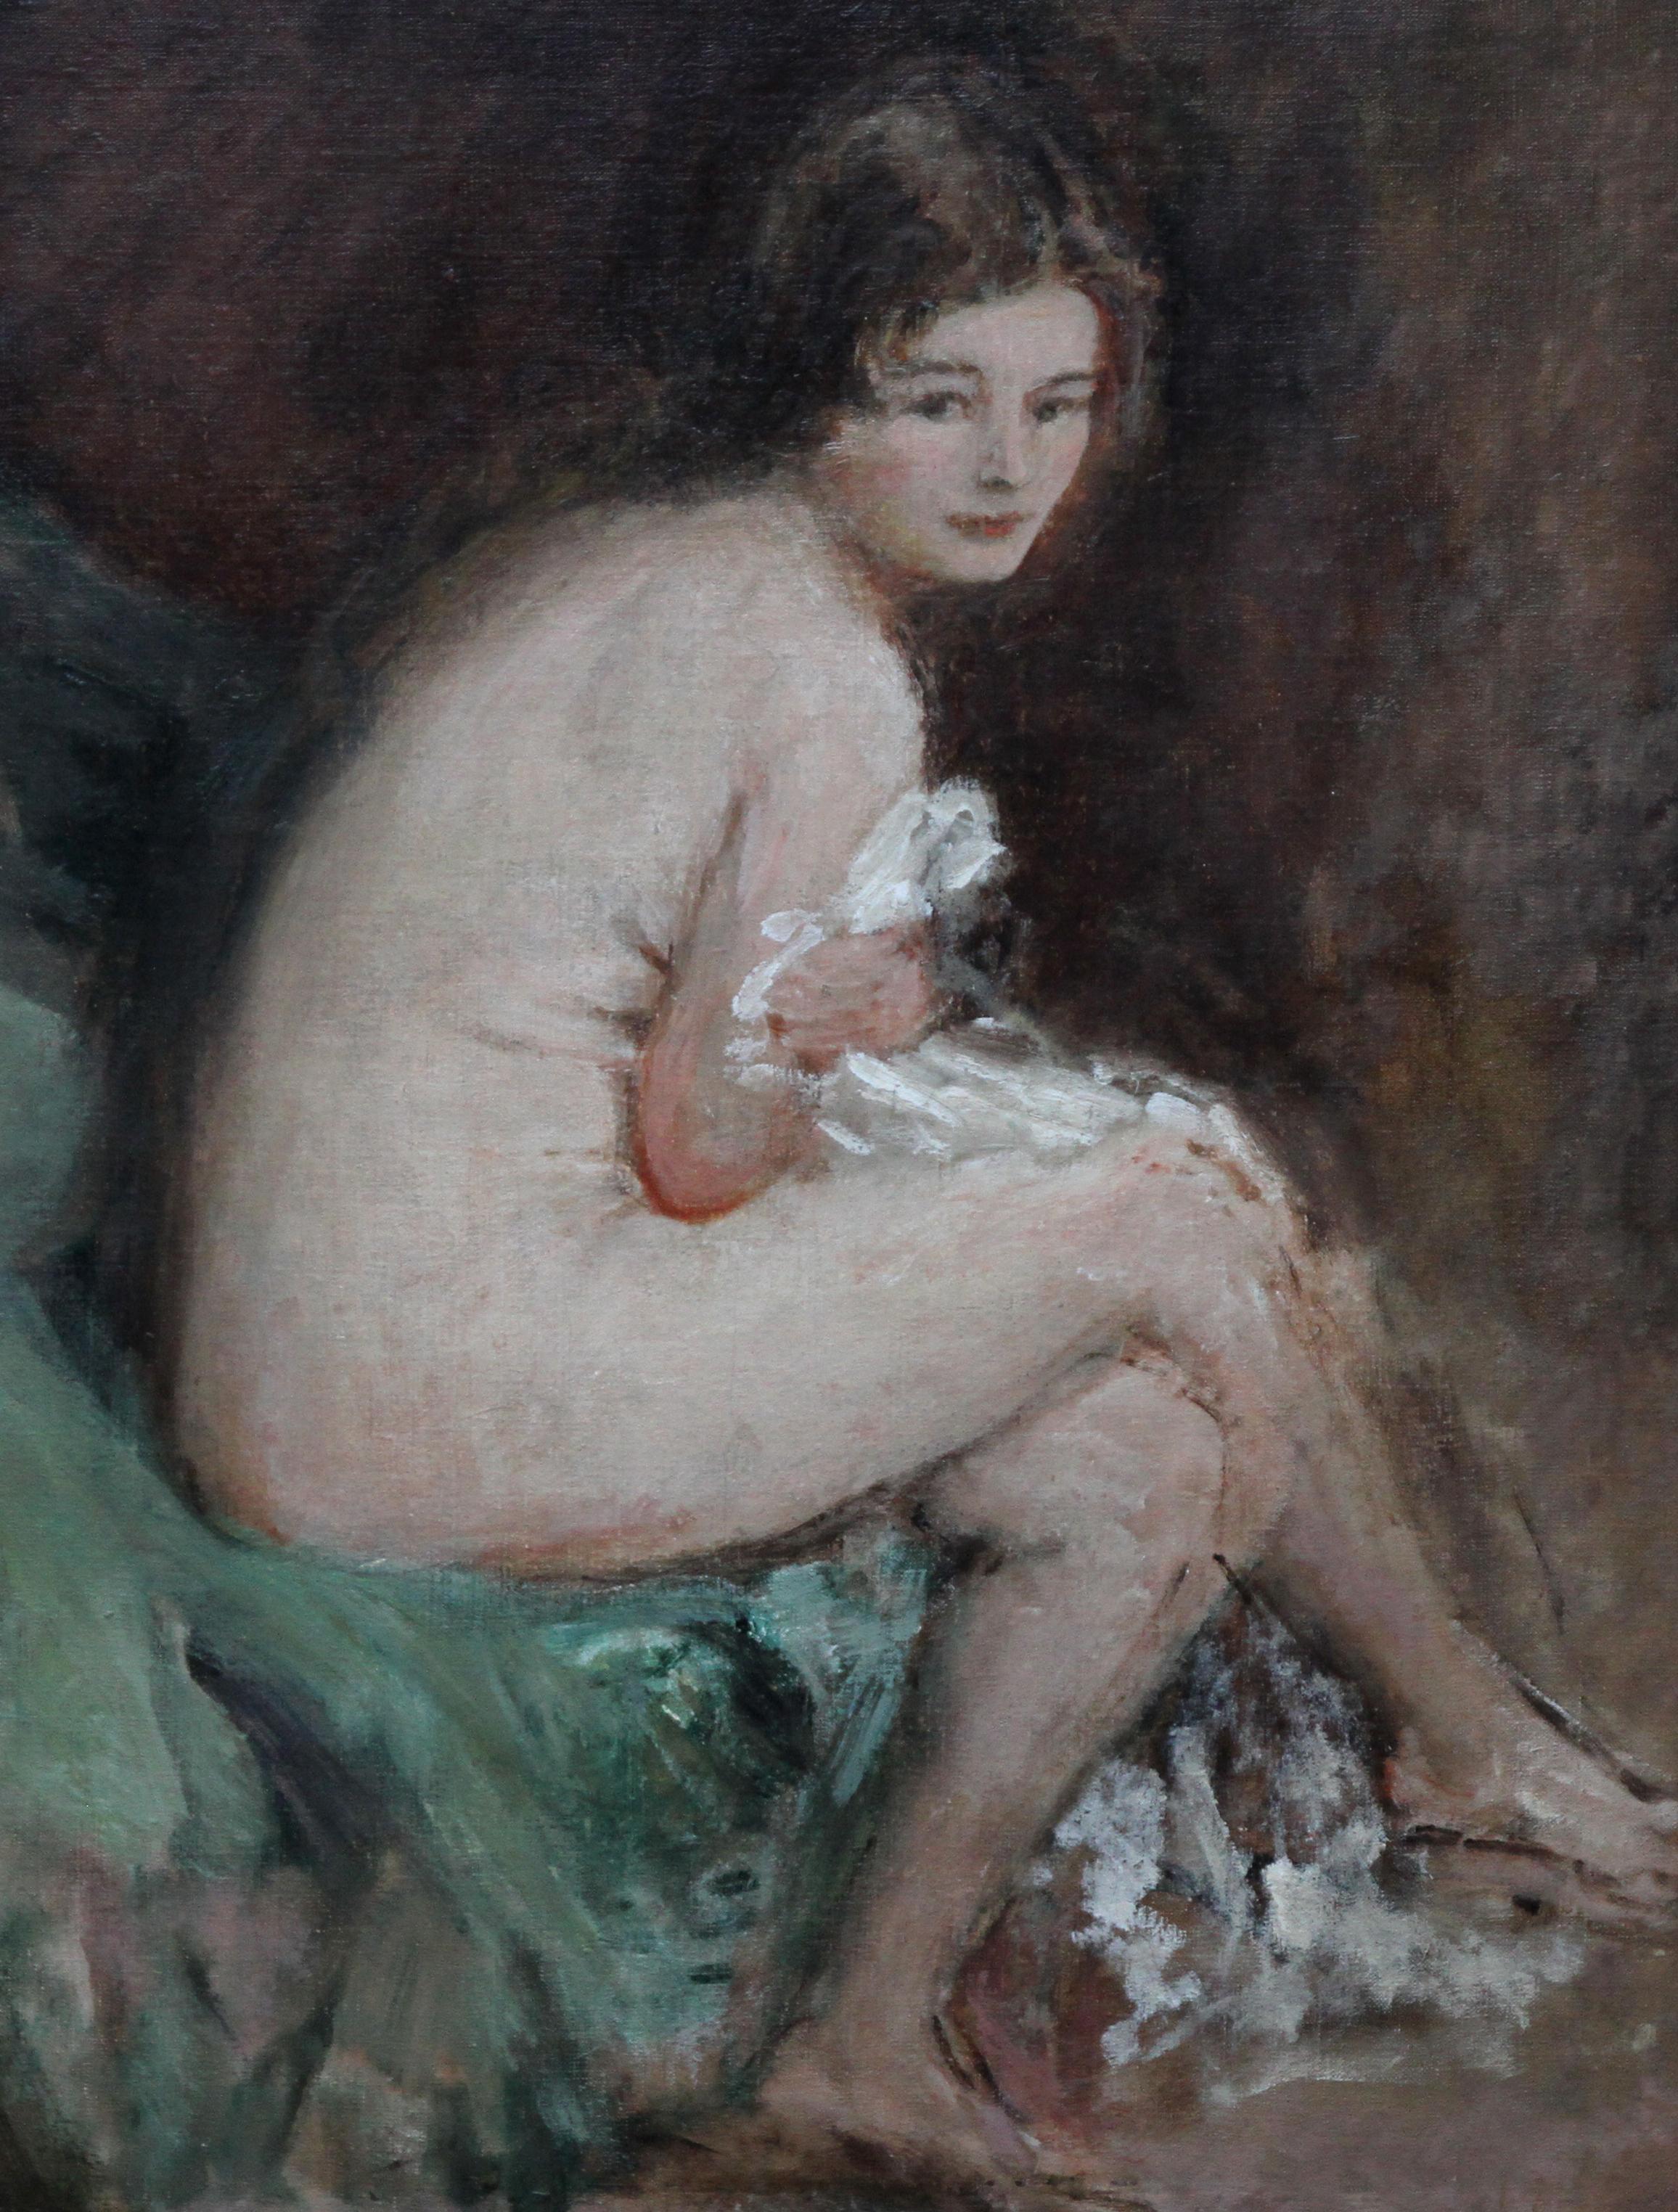 This charming oil on canvas Impressionist painting is by British artist Philip Wilson Steer and has excellent provenance. The painting is circa 1920 and of a demure seated nude young woman, whom Christies called Susannah. She is holding a robe or